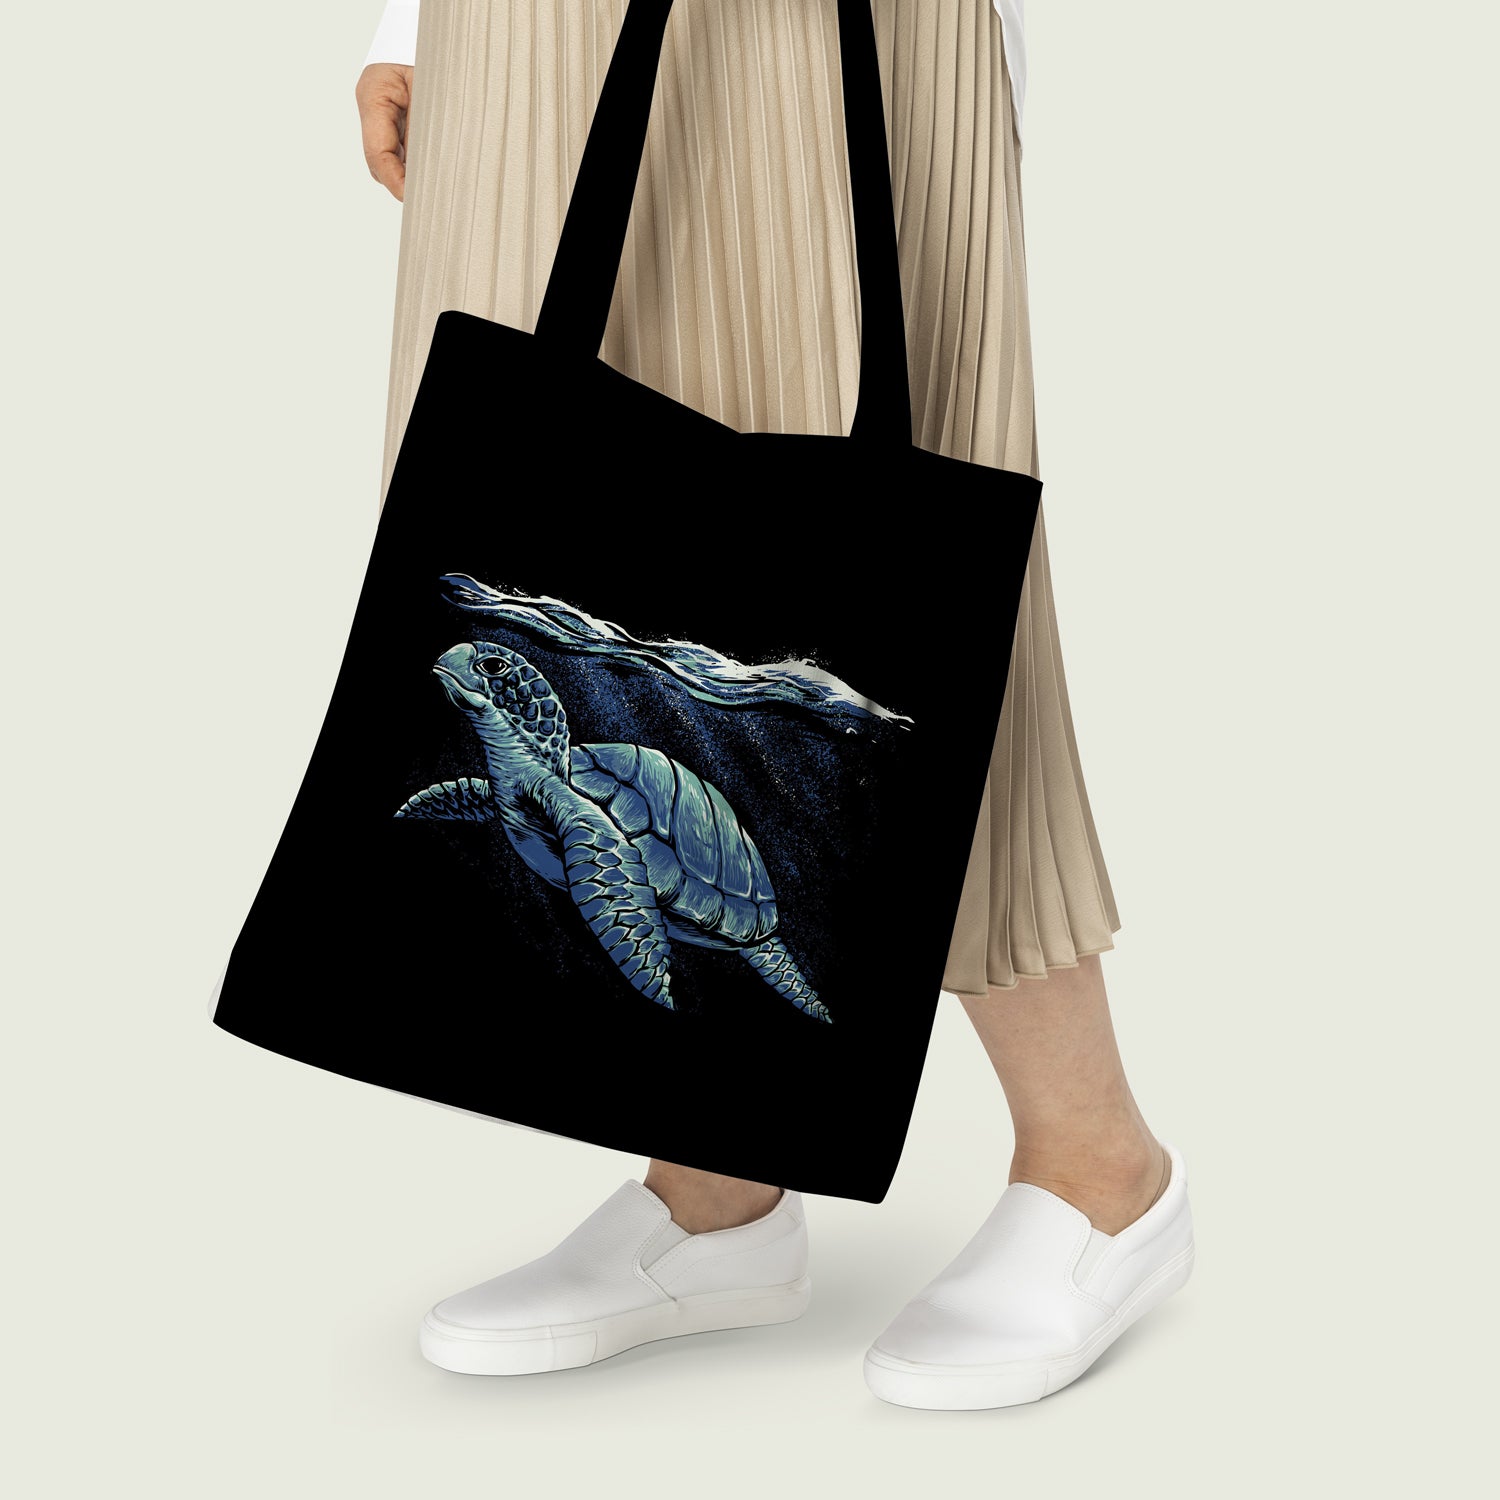 Stylish woman holding black tote bag featuring sea turtle design, adding a touch of nature to her outfit.